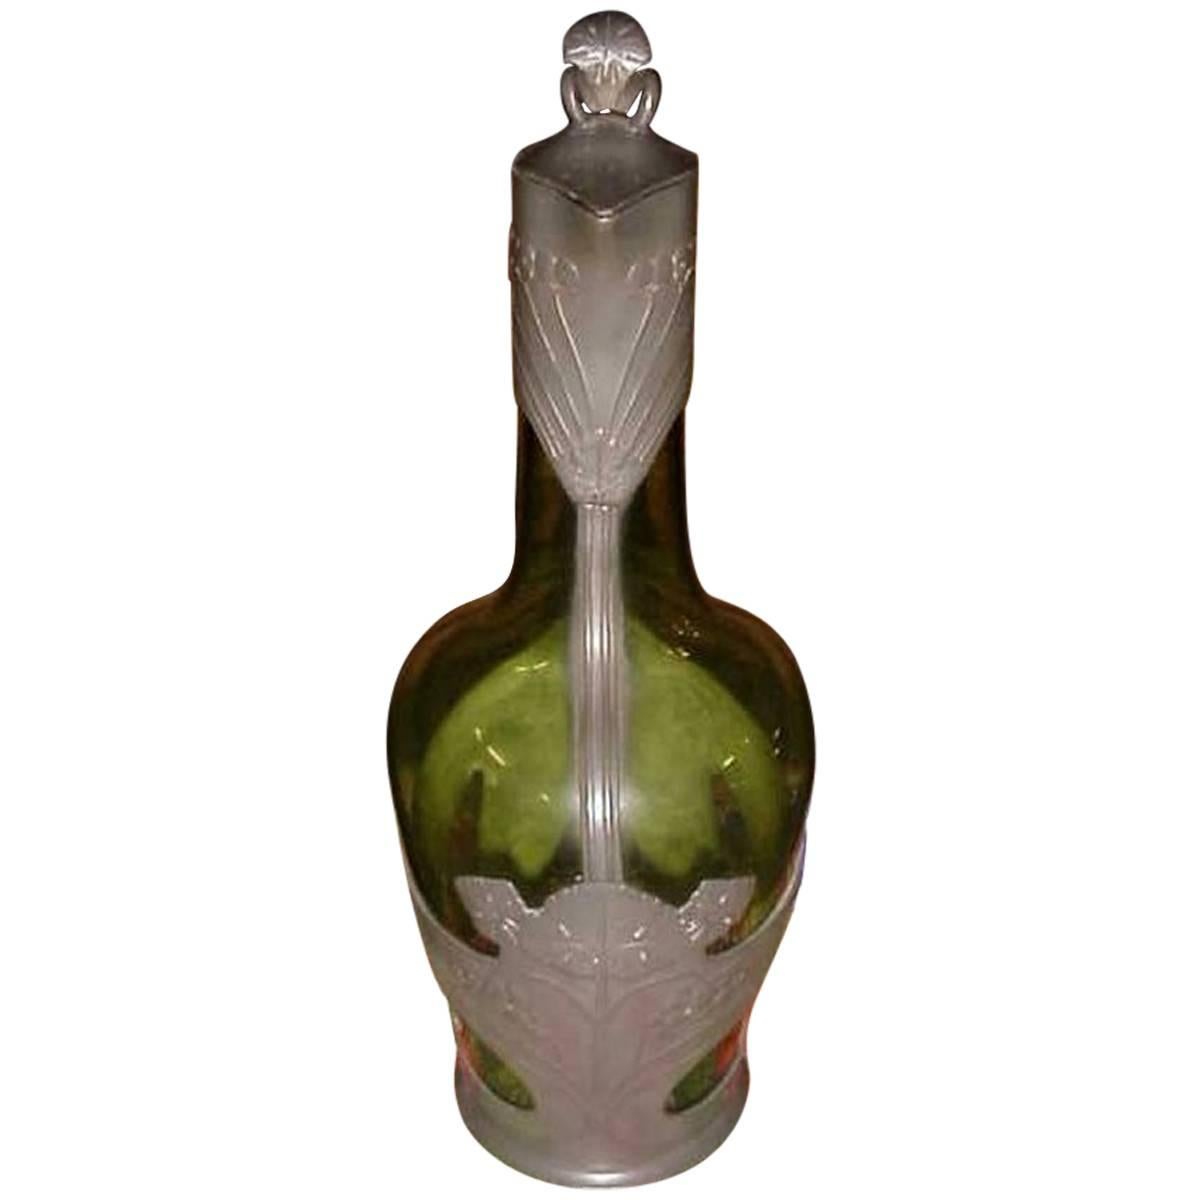 Orivit. An Art Nouveau pewter and green glass decanter. Design Number 1211. 
Unmarked but an identical version with stamped Orivit marks was illustrated in the Christies Art Nouveau sale 12 October 2004.